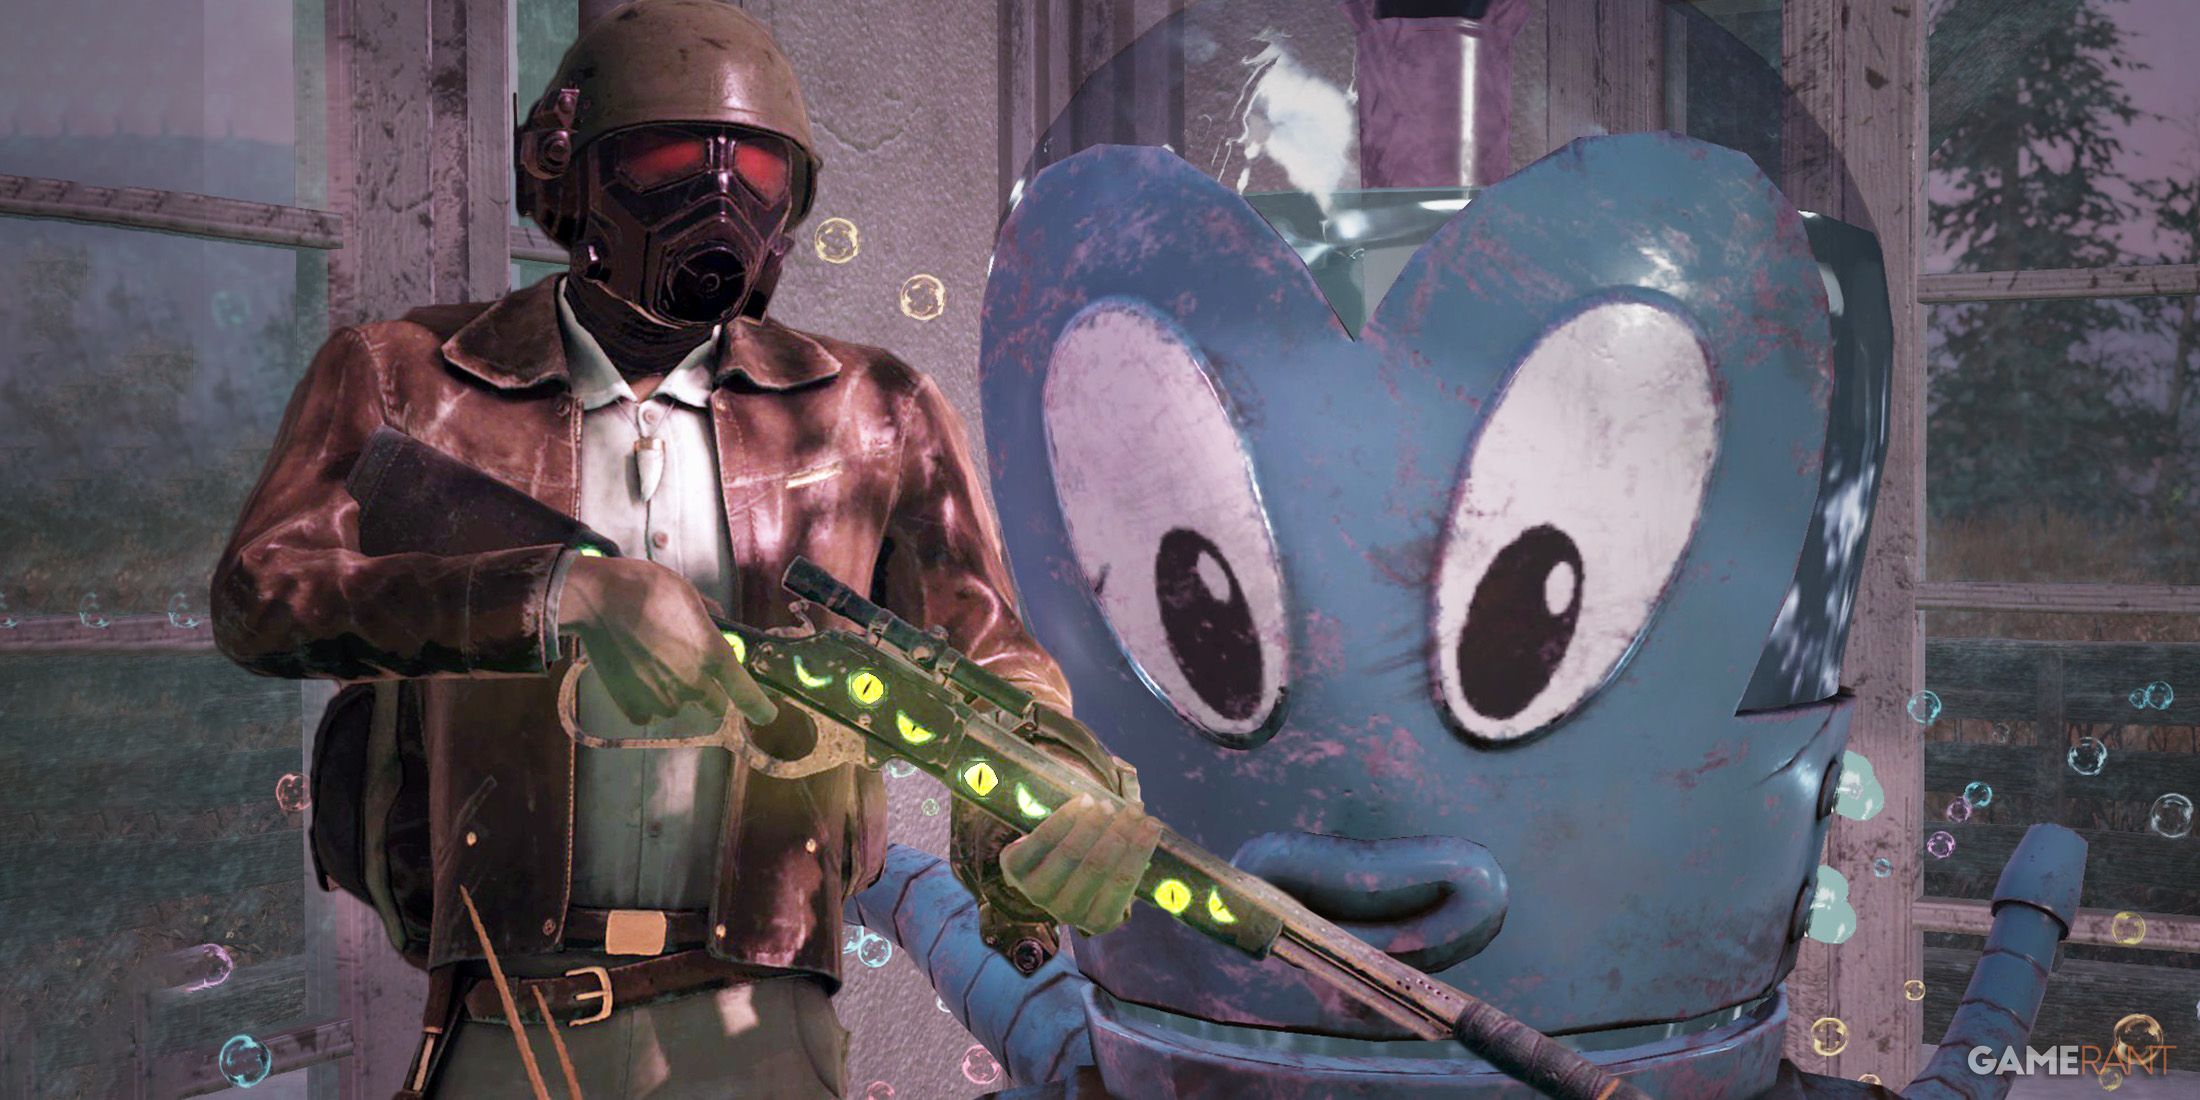 Fallout 76 Octopus Wavy Willard Bubble Machine and player wearing New Vegas helmet composite